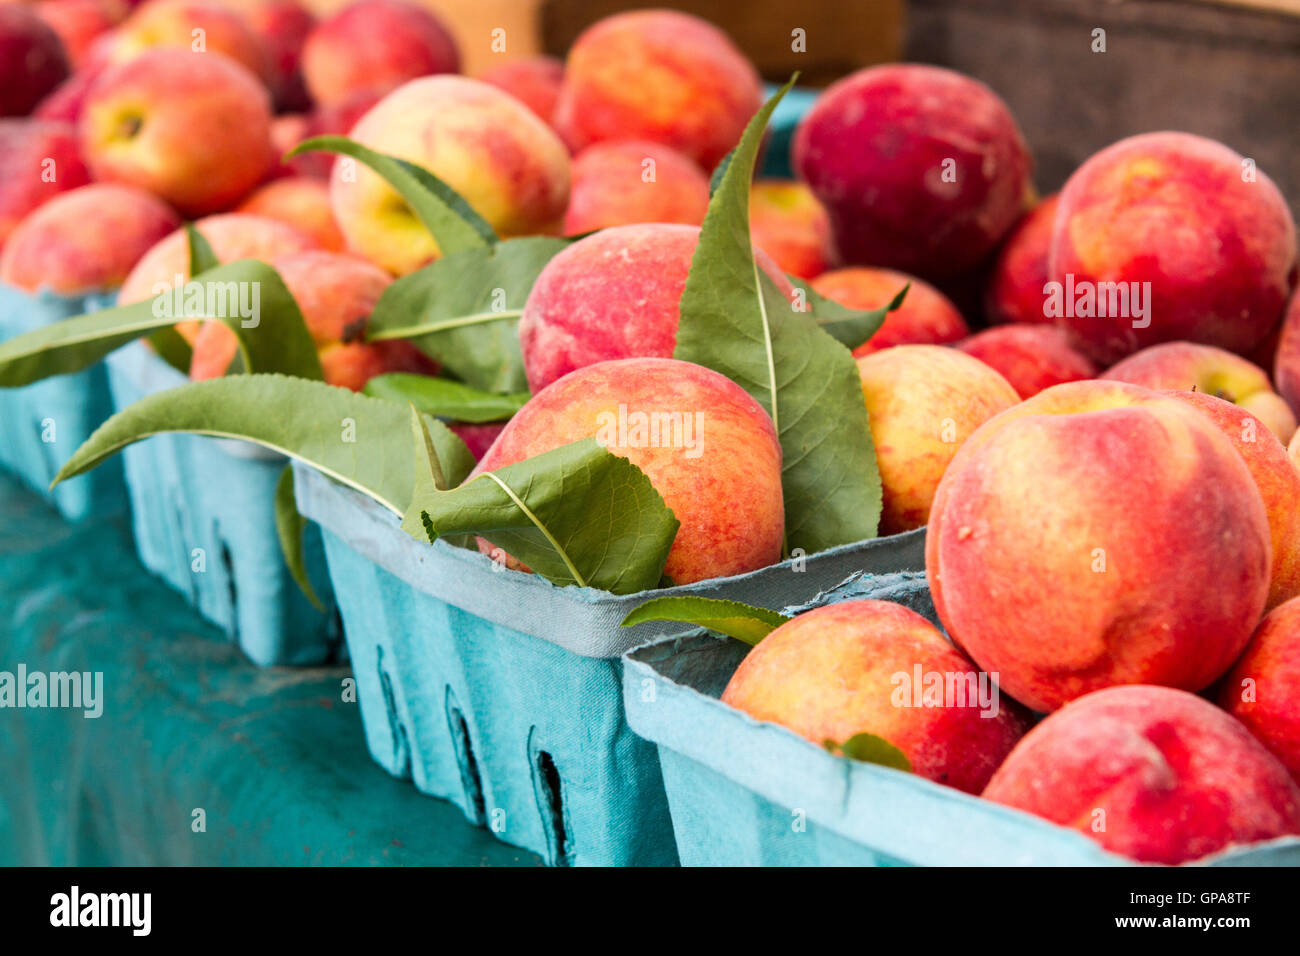 Peaches in baskets at farmers market Stock Photo